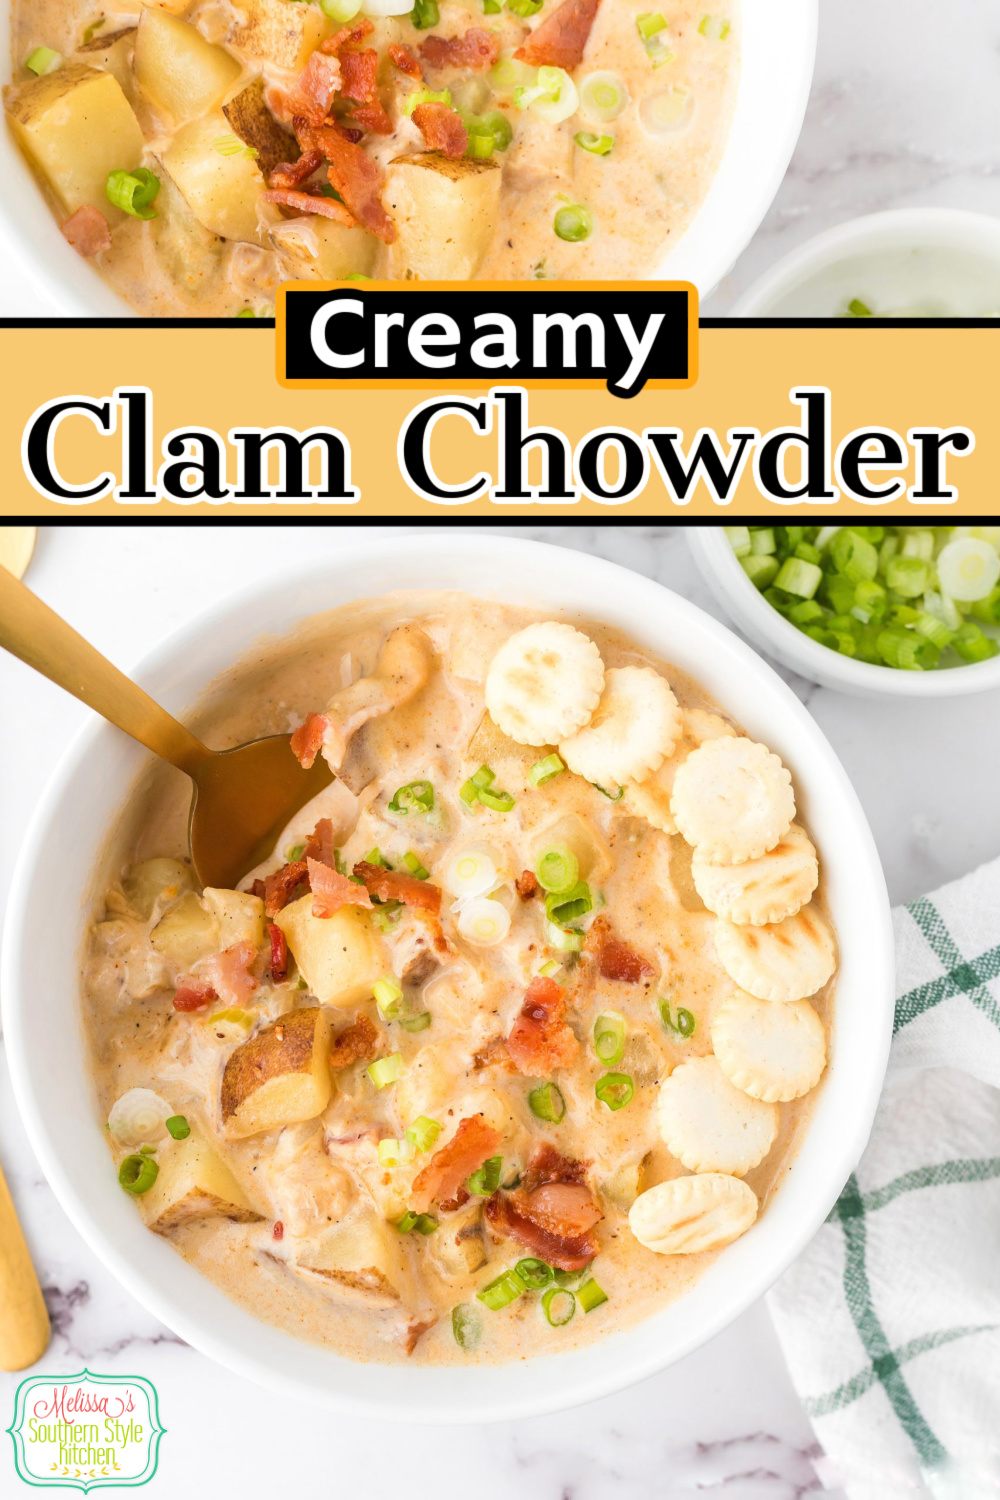 Treat the family to a steamy bowl of this creamy Southern style Clam Chowder at home #clamchowder #southernstyle #southernchowderrecipes #easyclamchowder #clamsrecipes #seafoodchowder #clamchowderrecipe via @melissasssk